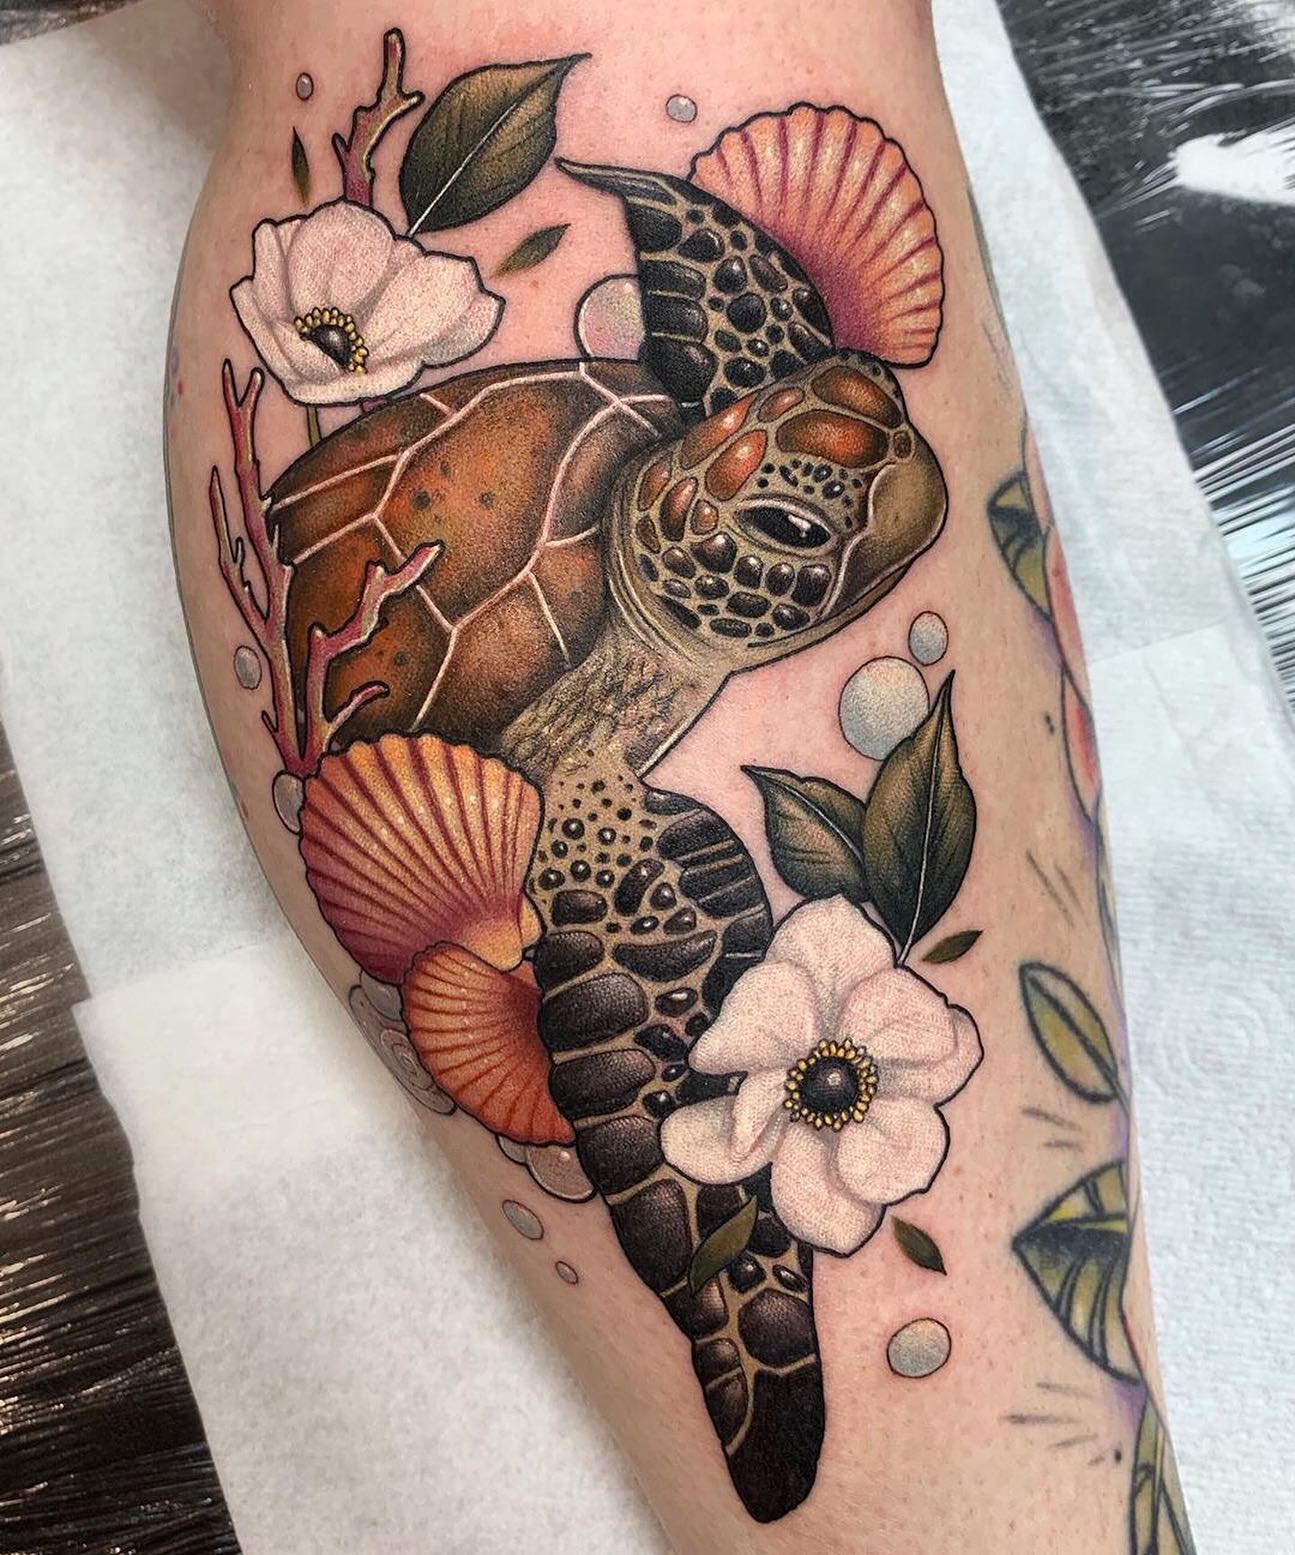 Watercolor style sea turtle tattoo with shells and flowers on the calf